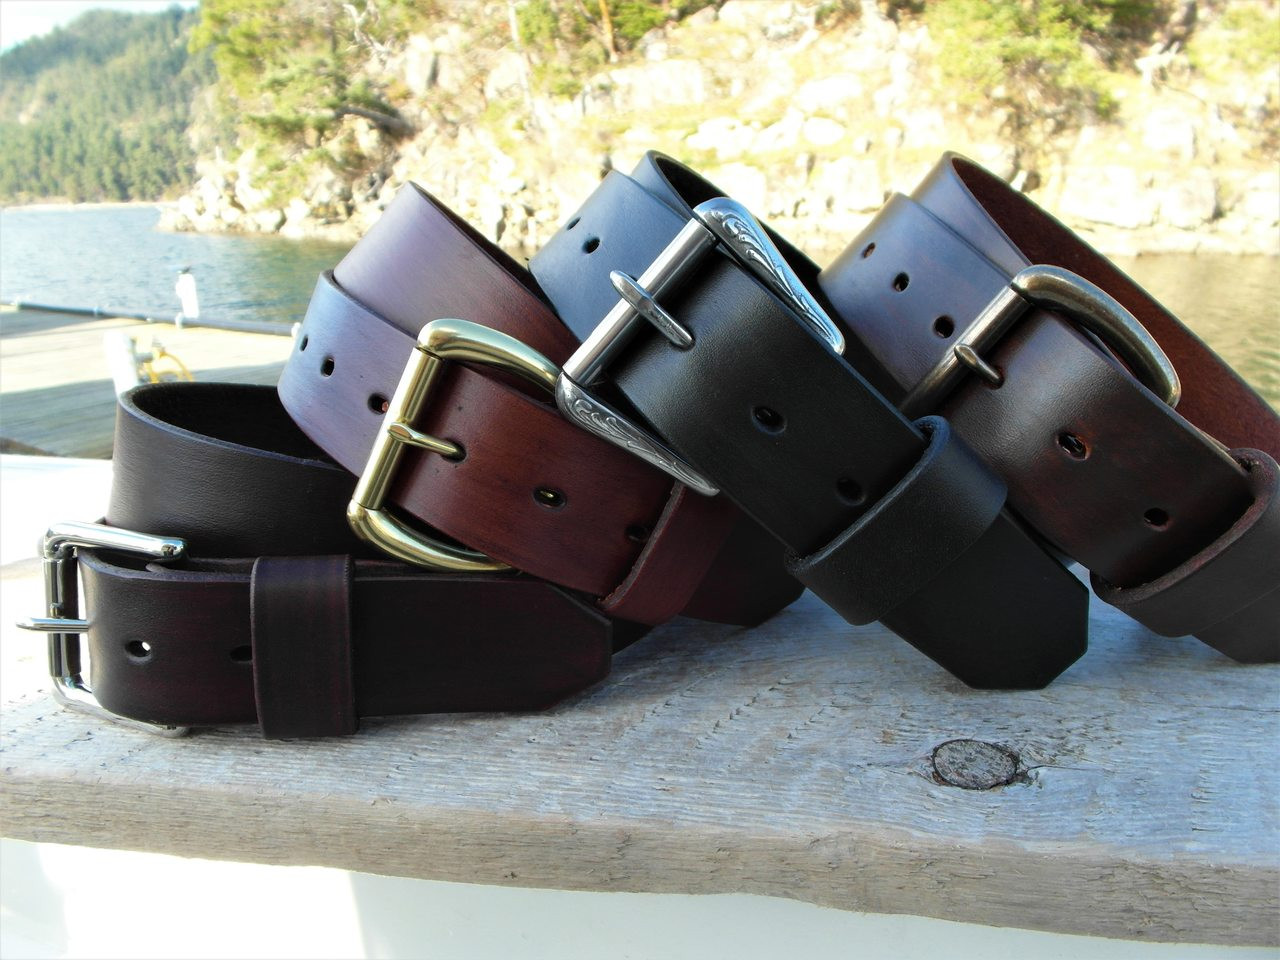 Full grain leather belts • Handcrafted Quality • Duvall Leatherwork